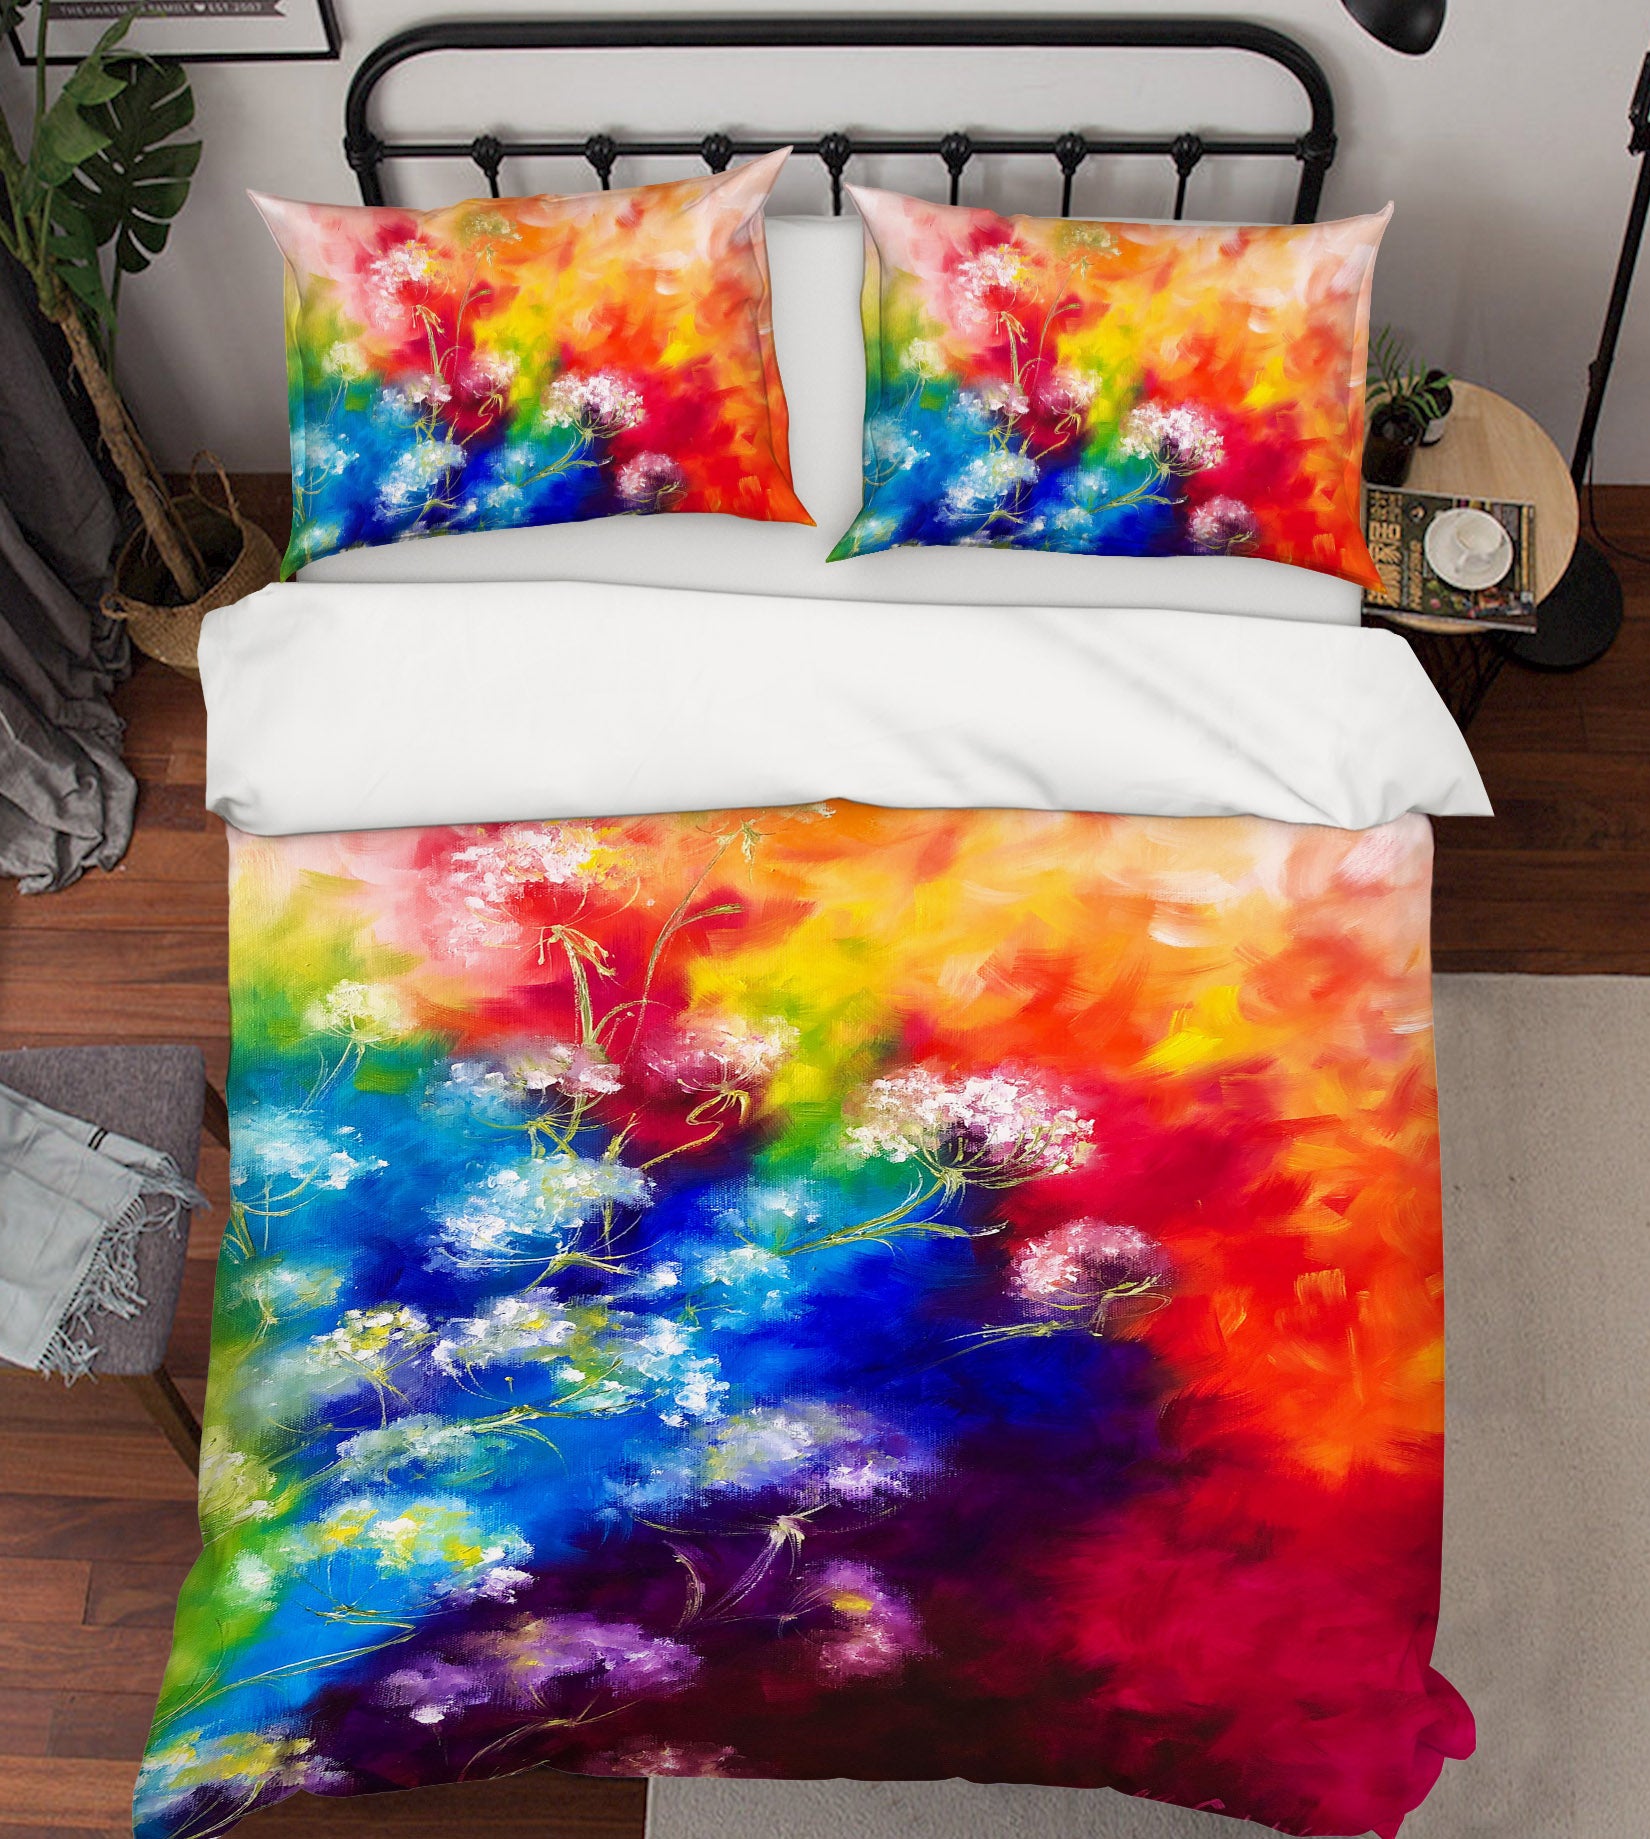 3D Color Painting 612 Skromova Marina Bedding Bed Pillowcases Quilt